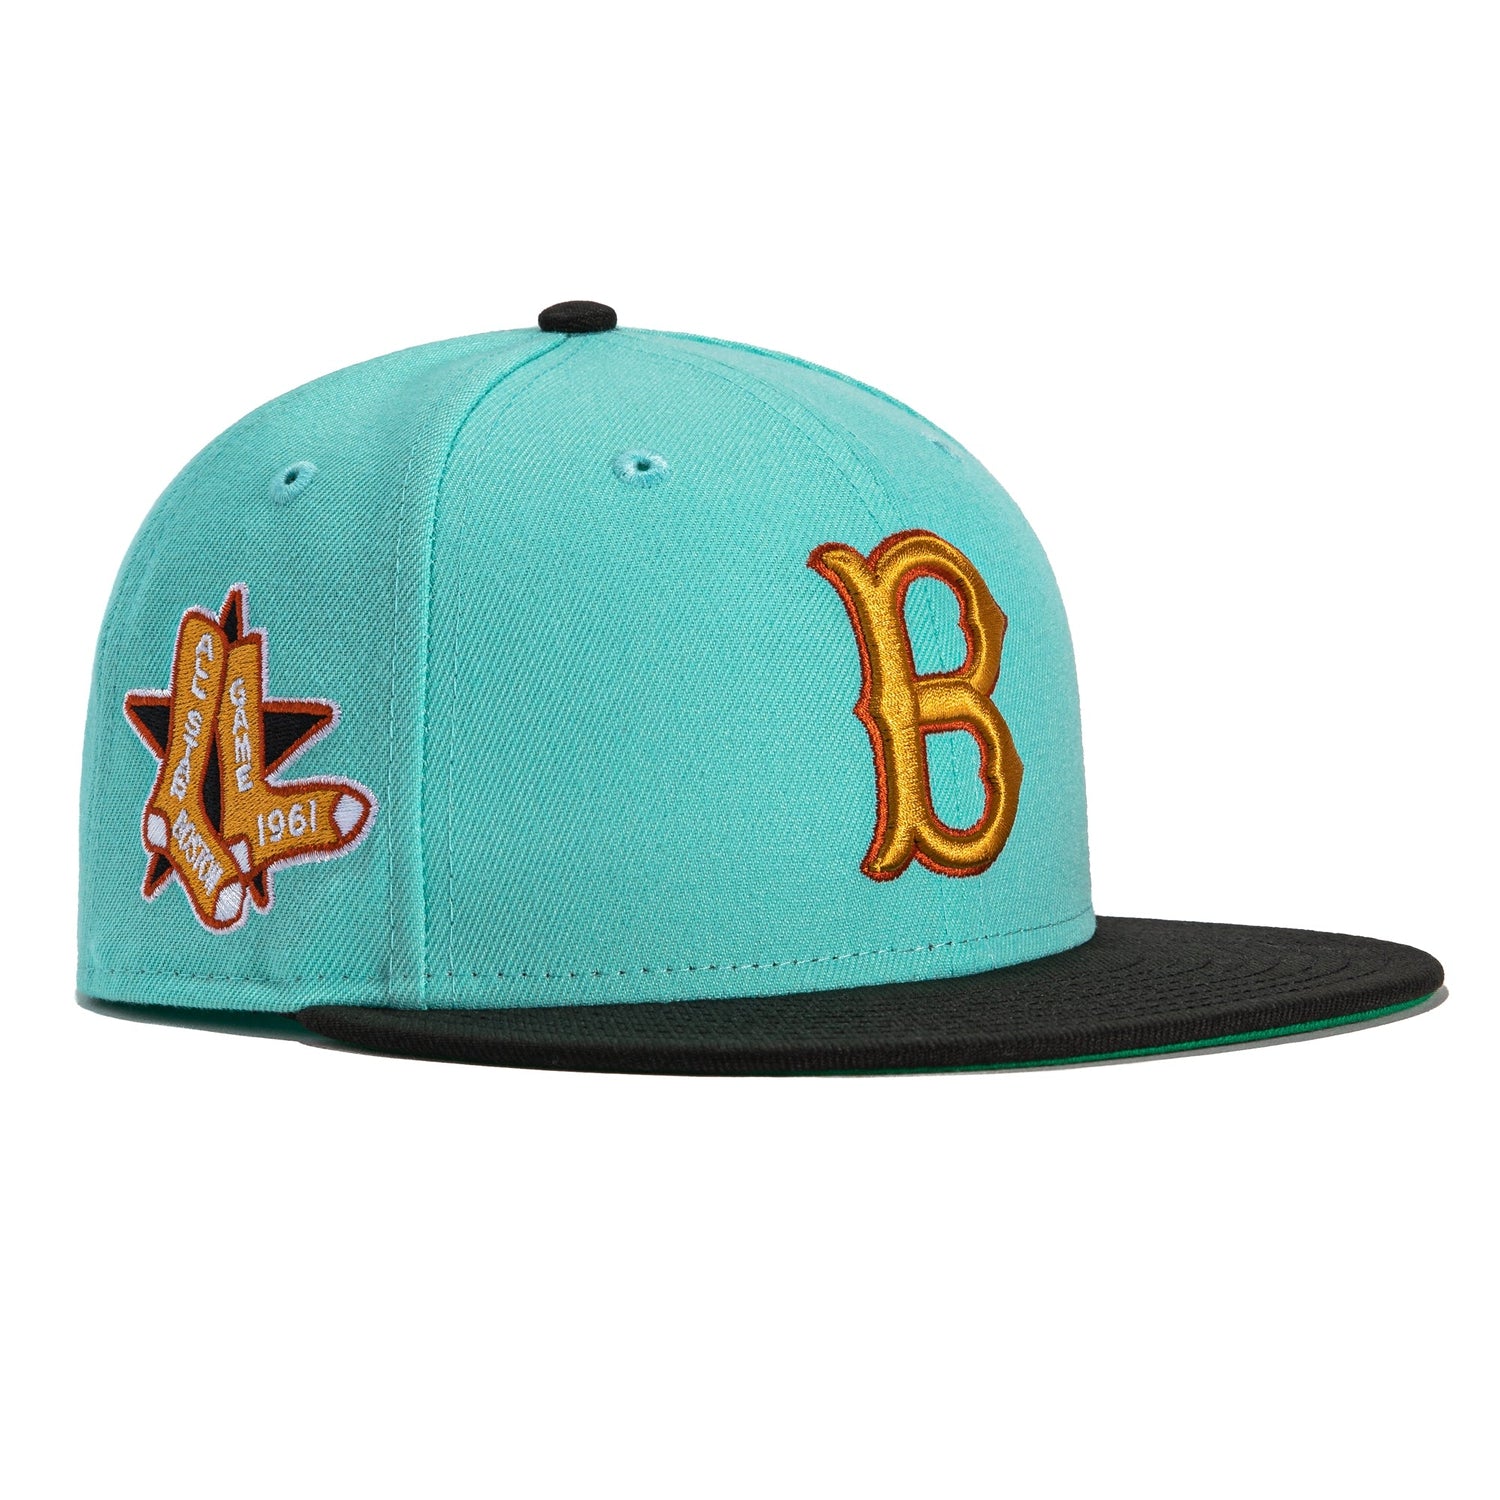 New Era 59FIFTY San Francisco Giants 1961 All Star Game Patch Hat - Black 7 1/4